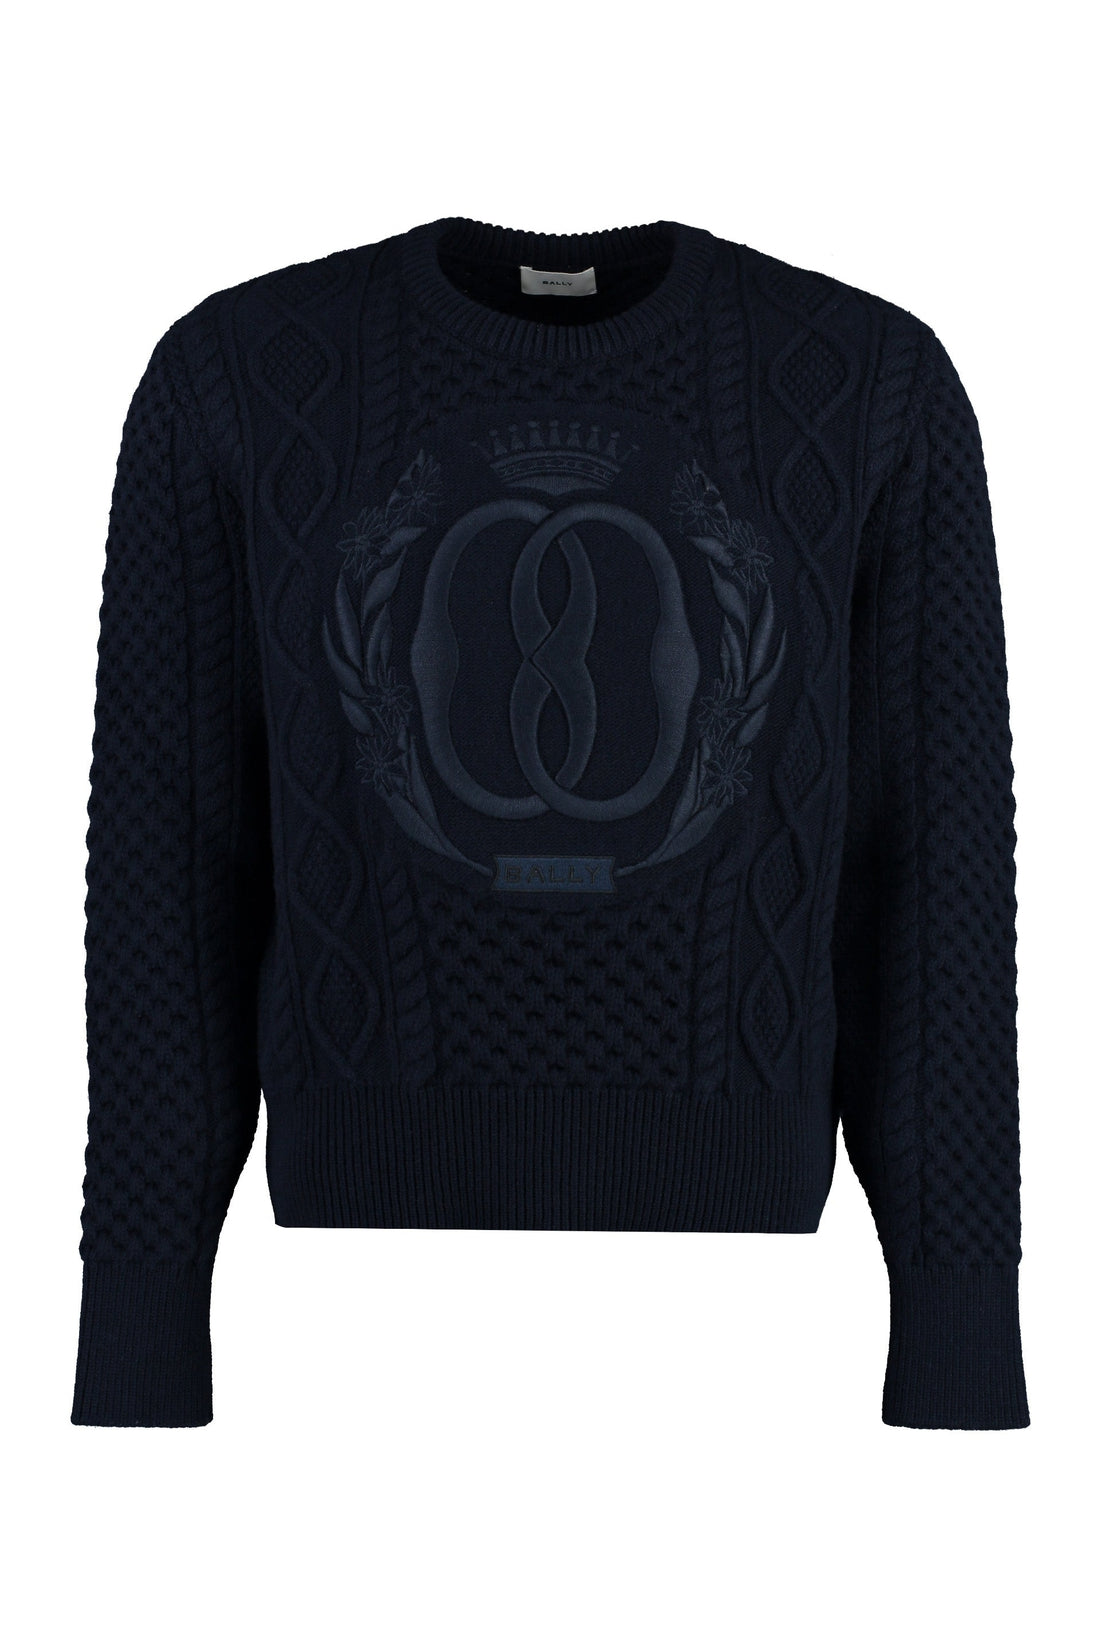 Bally-OUTLET-SALE-Wool sweater-ARCHIVIST